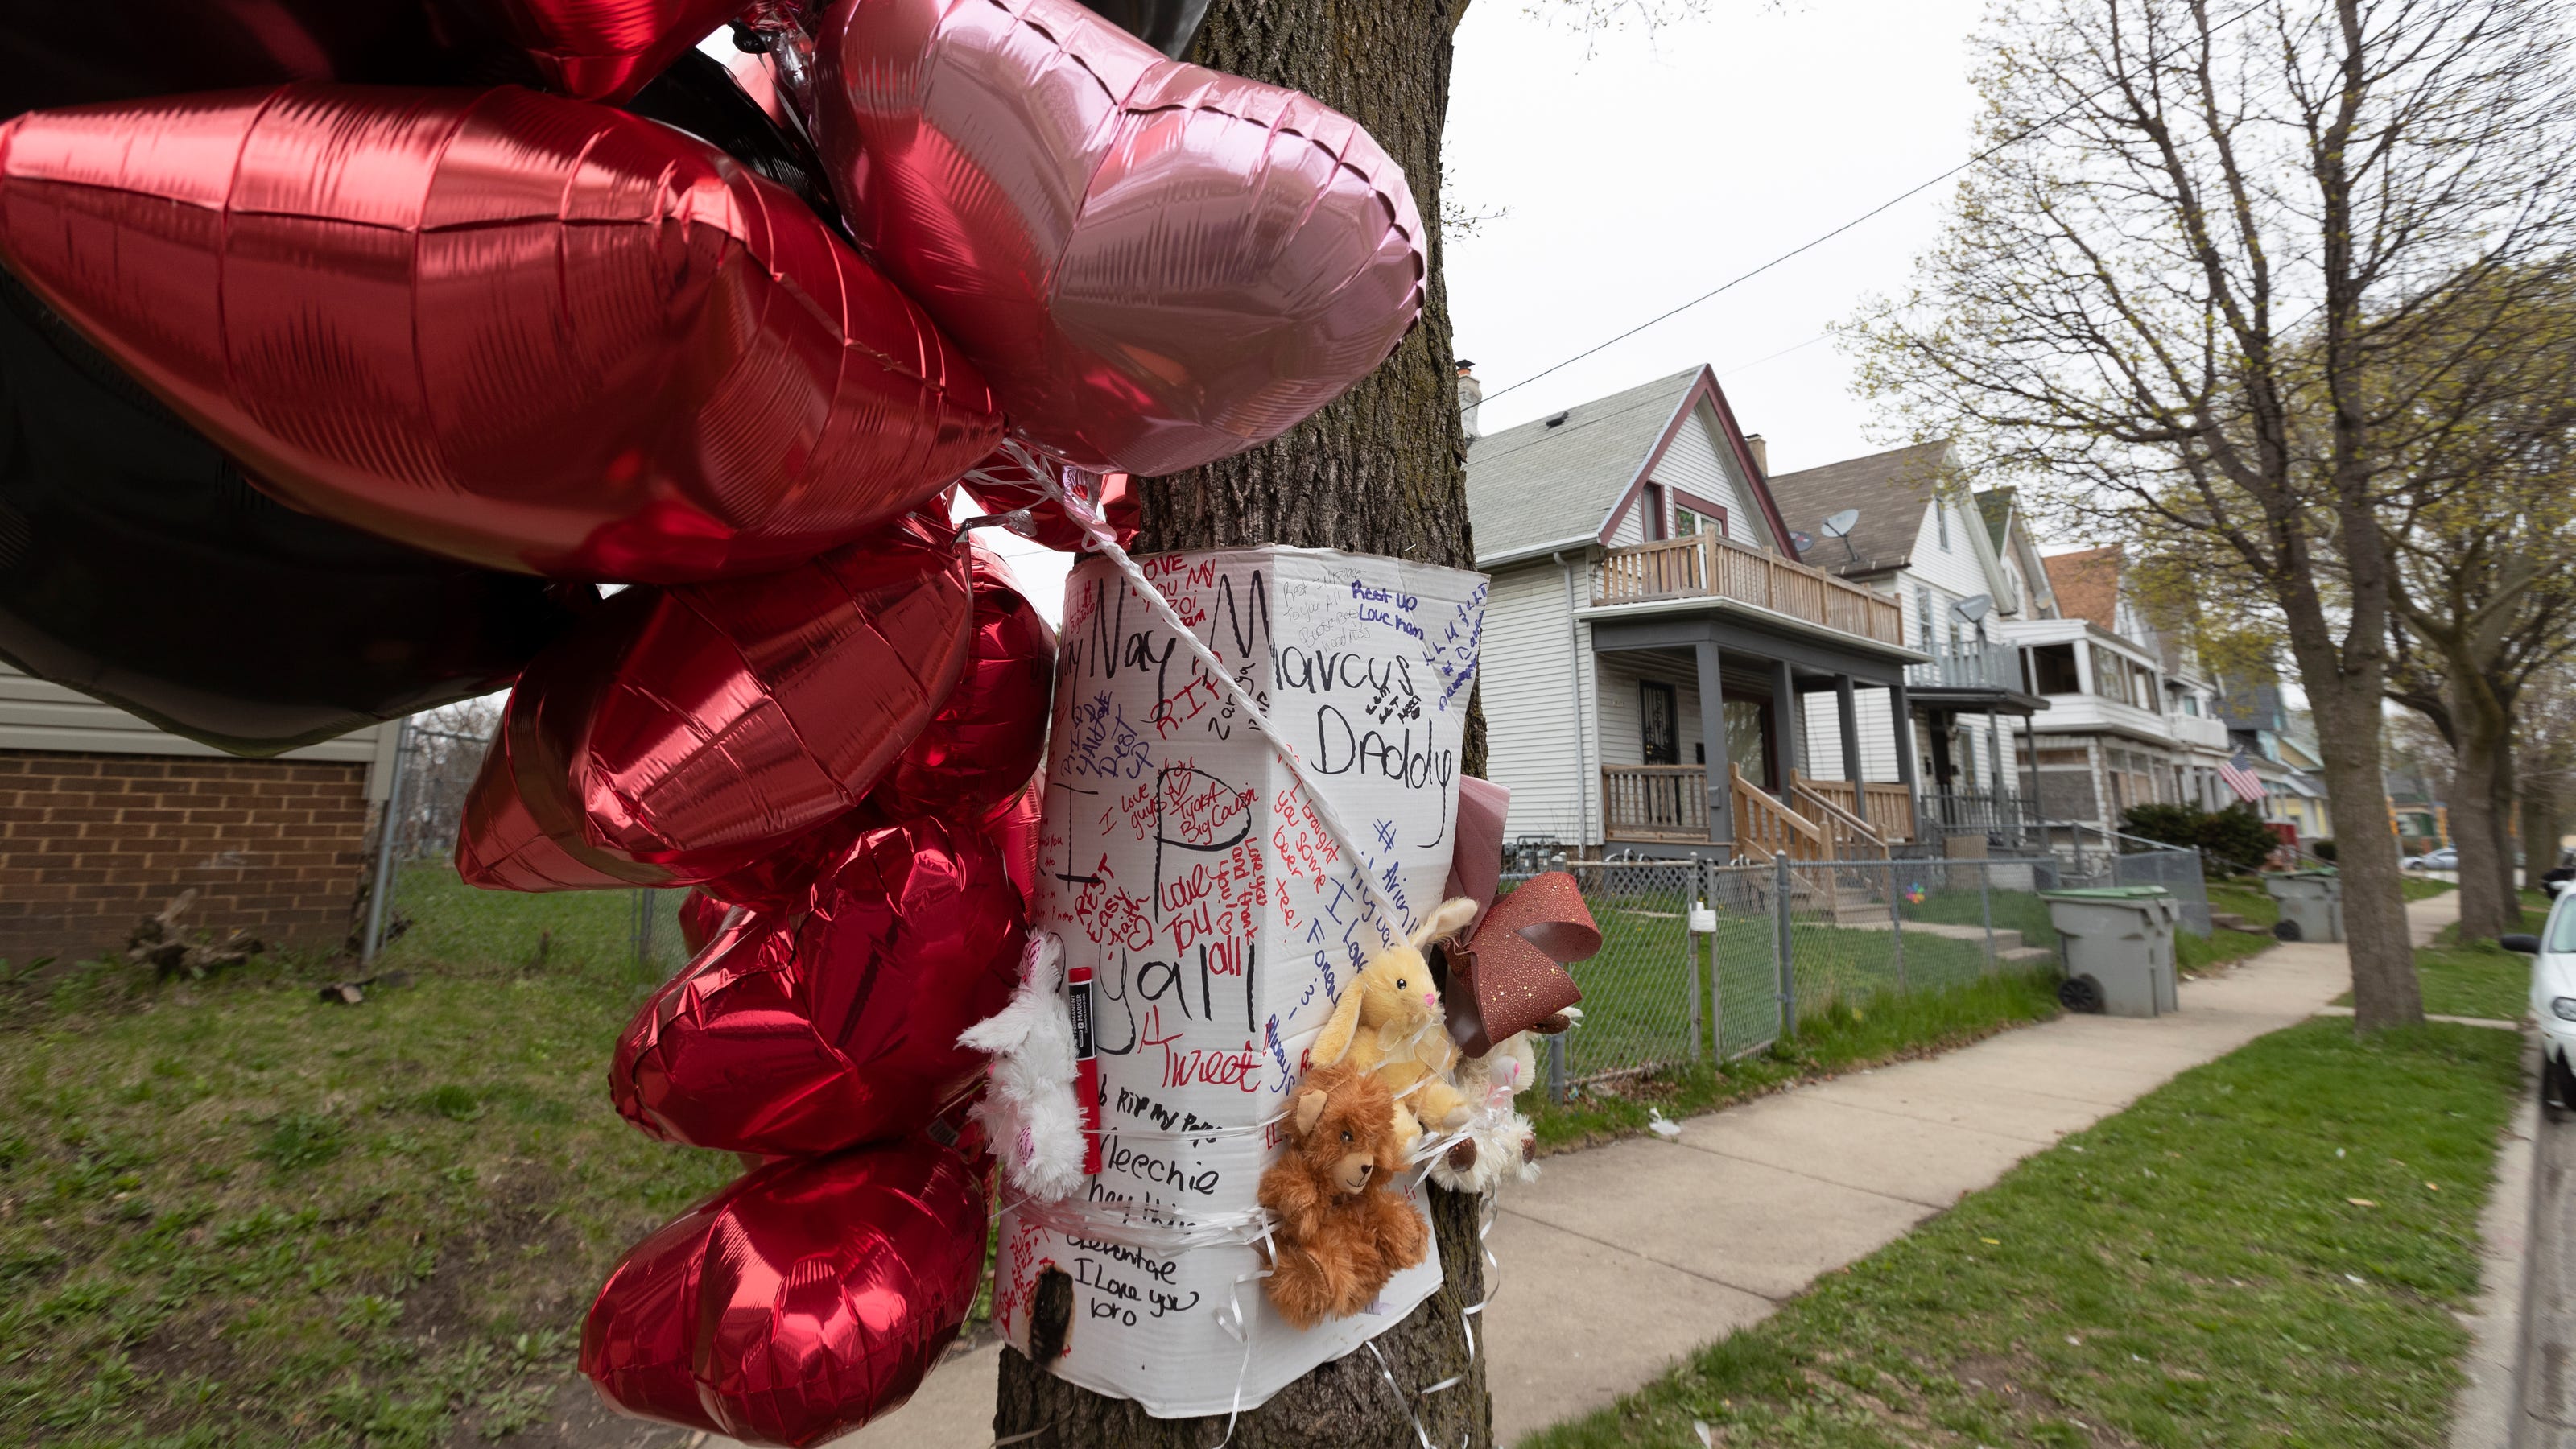 Milwaukee Homicide Rate Soars With Bullets Flying Everywhere